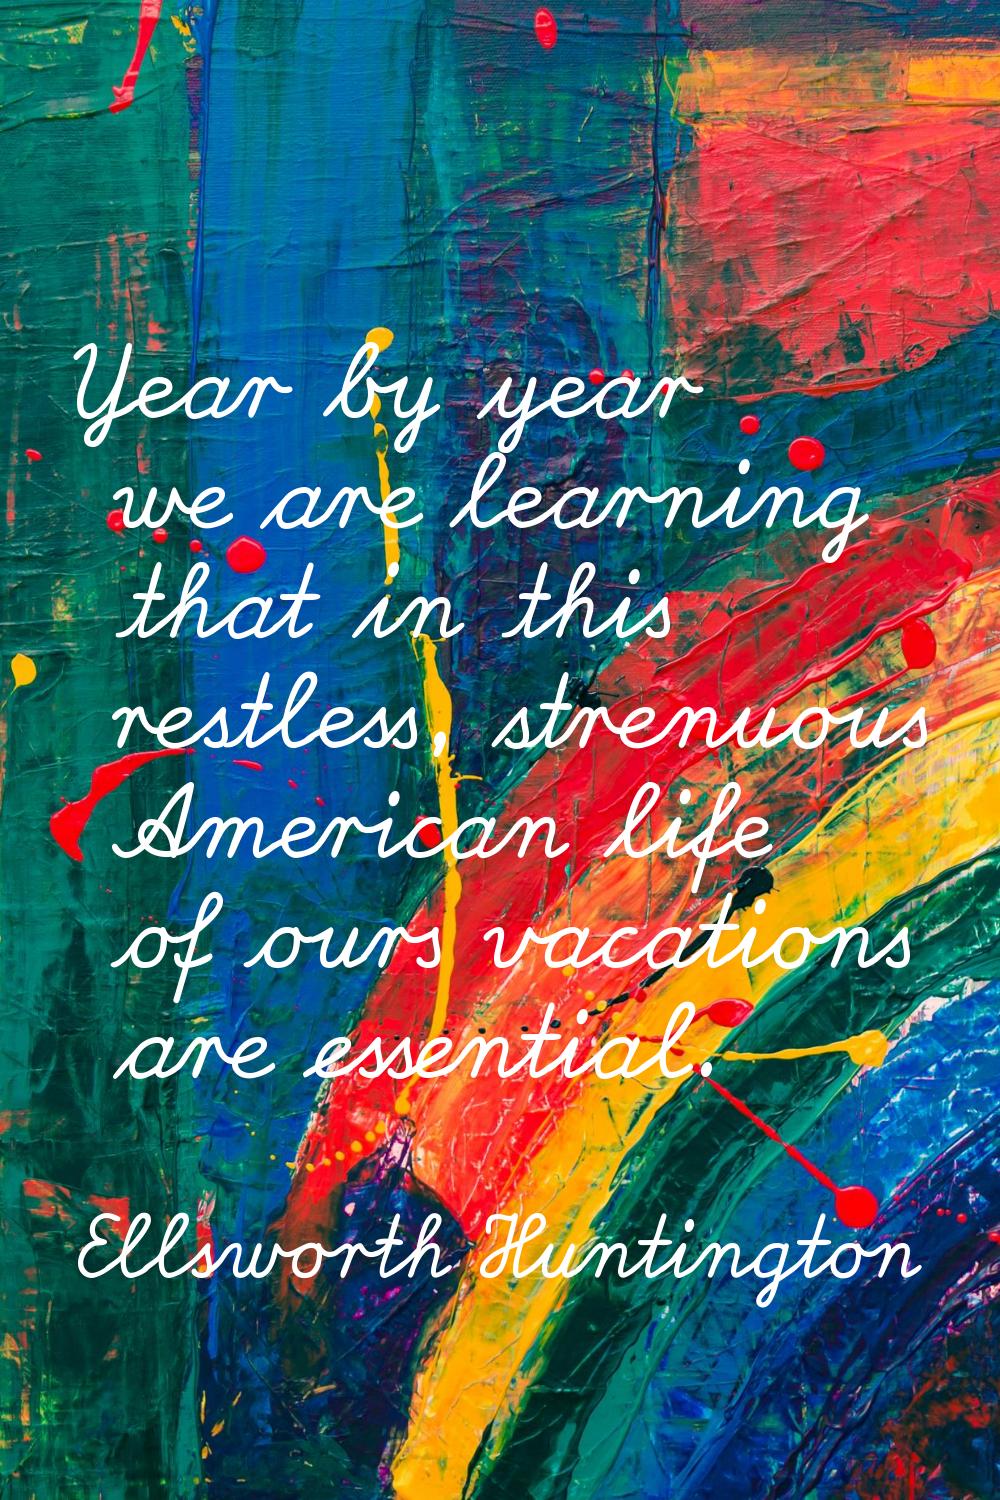 Year by year we are learning that in this restless, strenuous American life of ours vacations are e